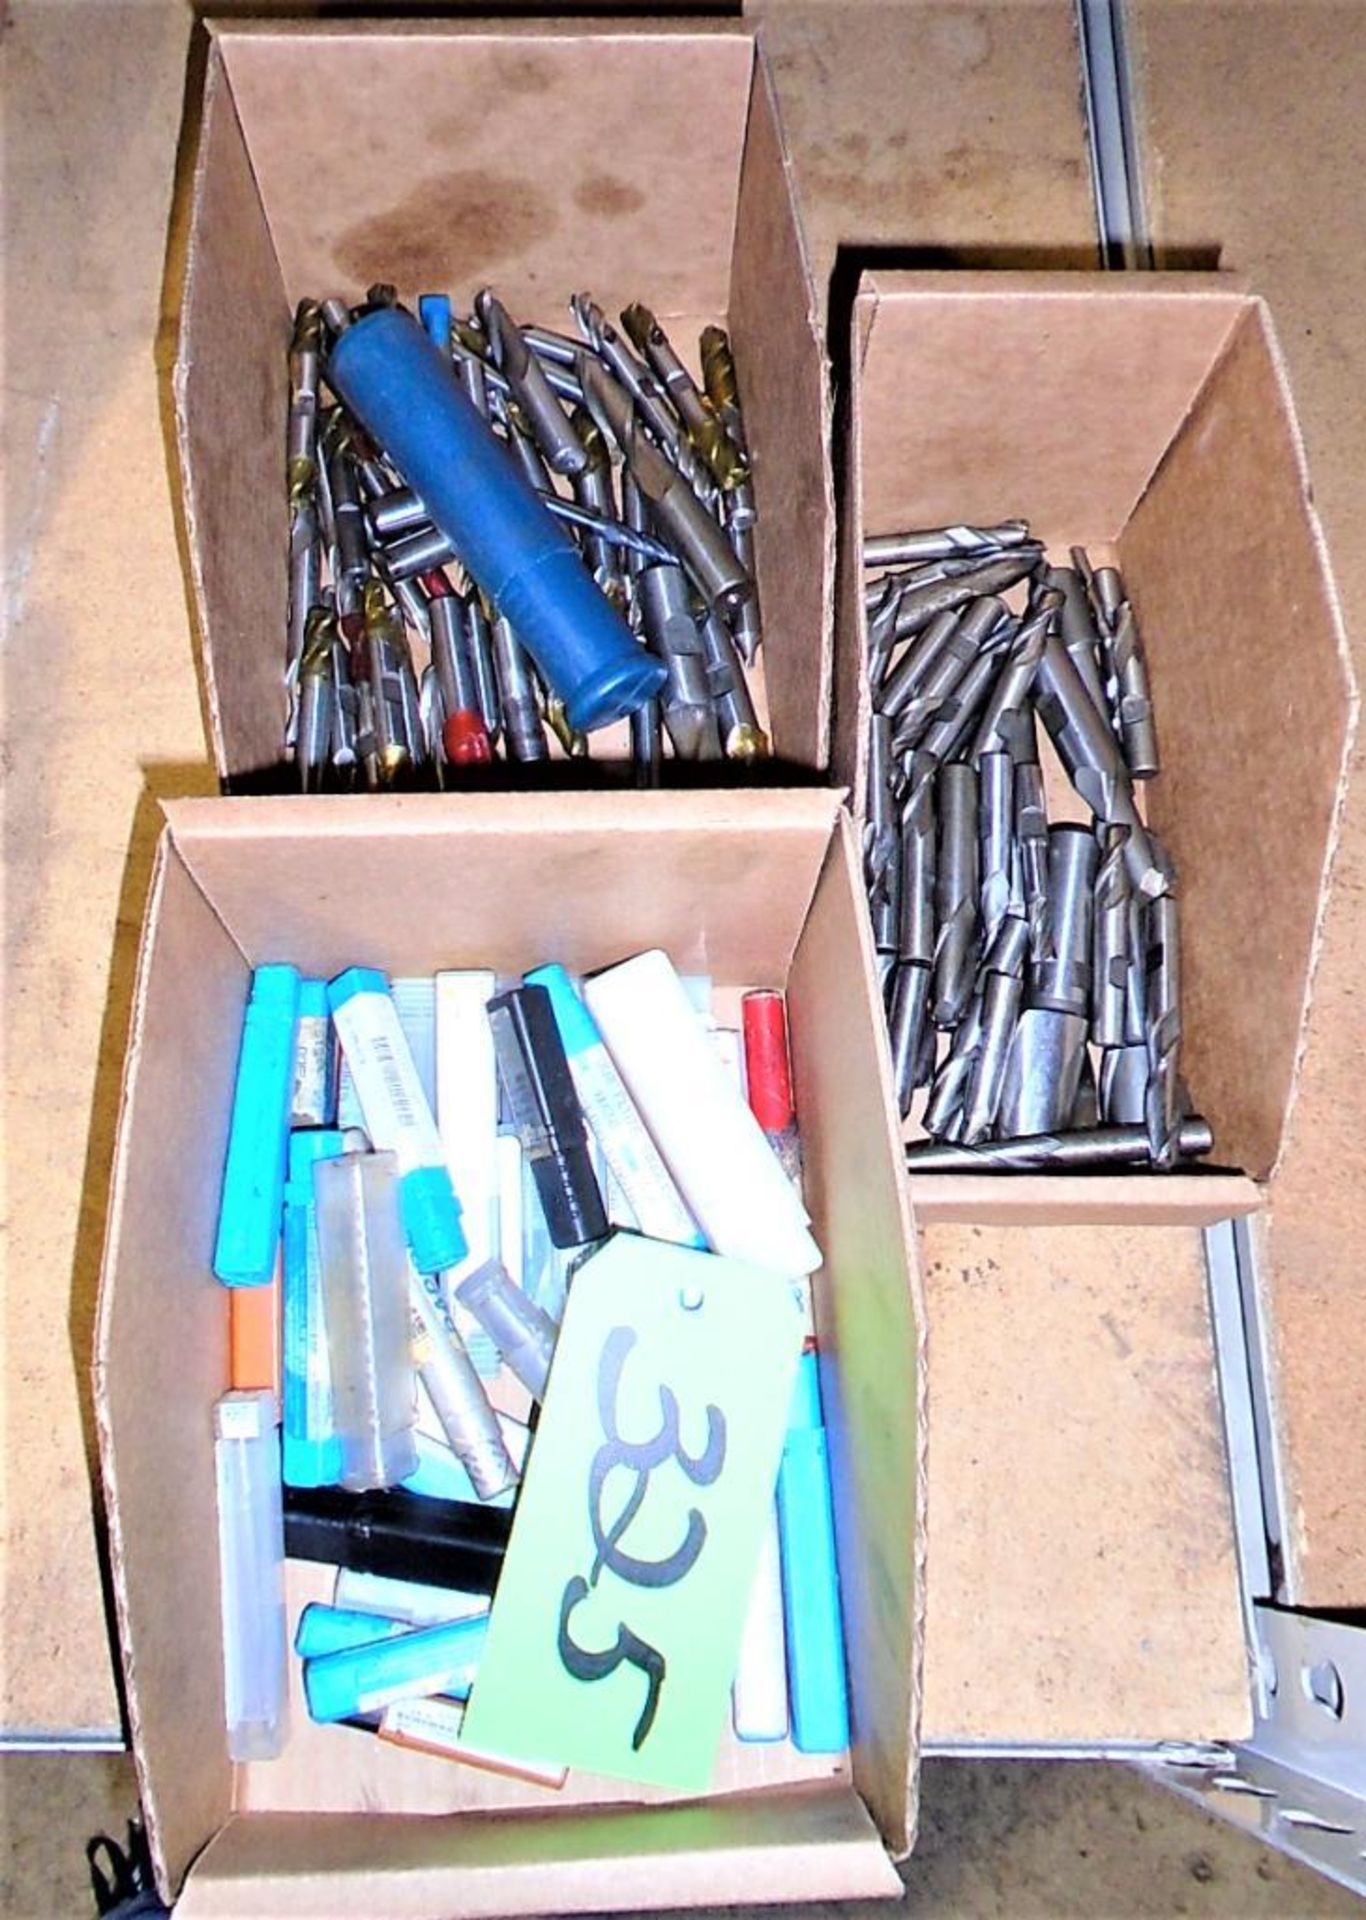 HSS End Mills in (3) Boxes